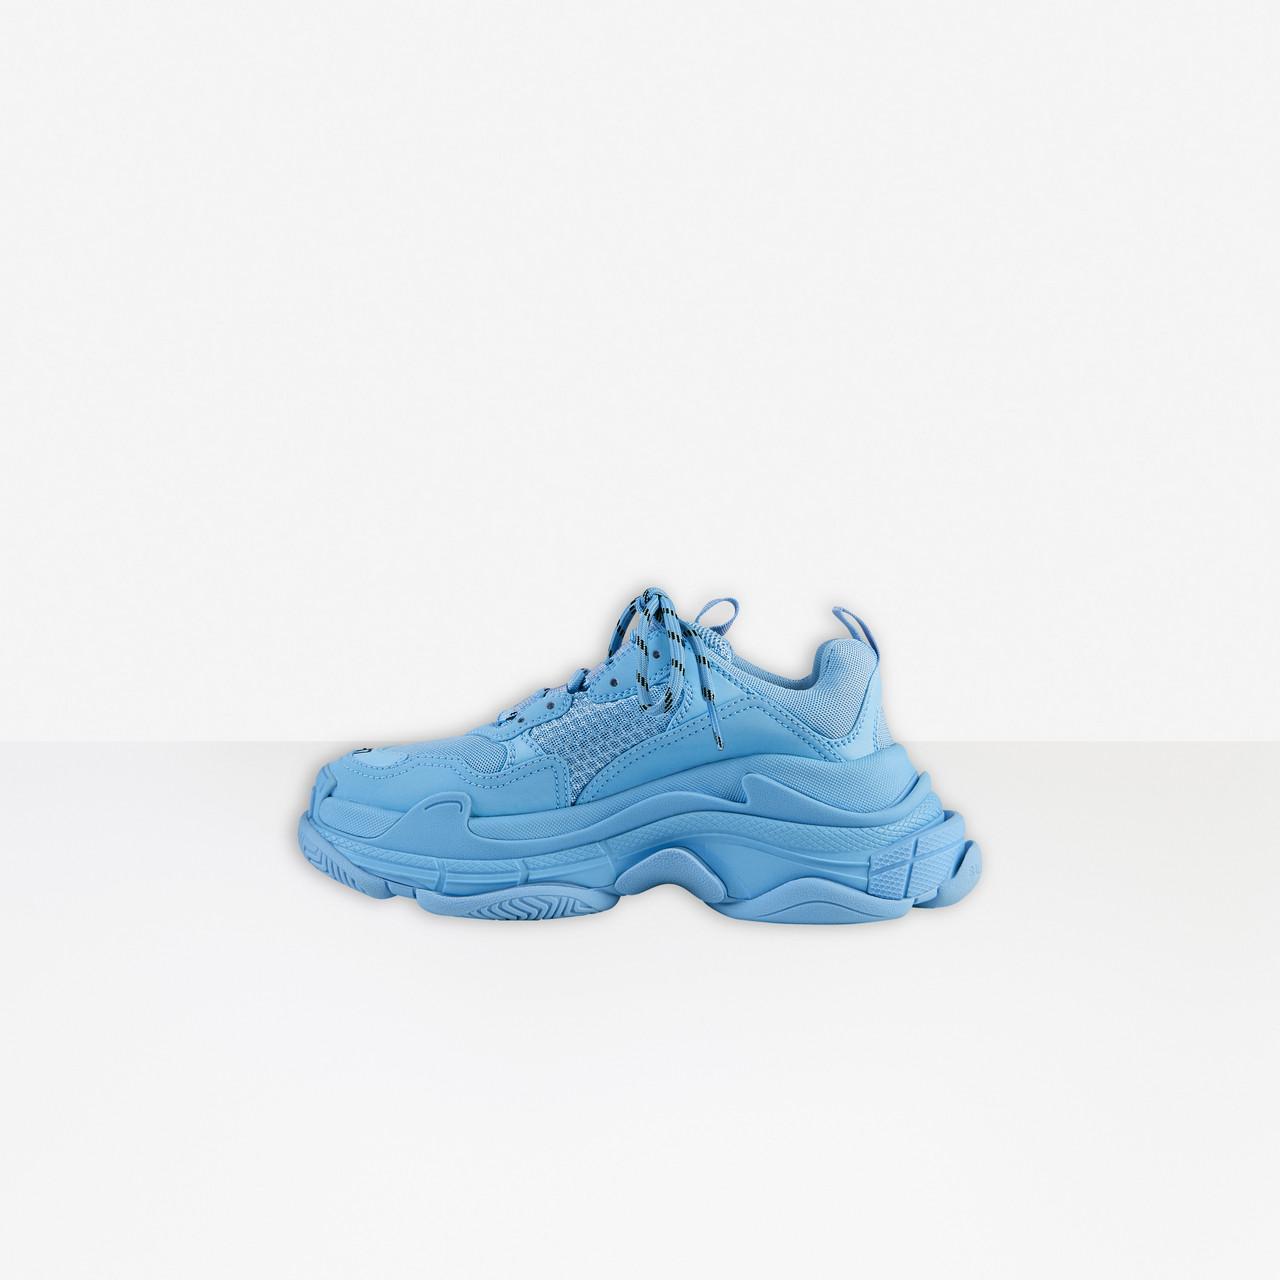 Balenciaga Synthetic Triple S Sneaker in Light Blue (Blue) - Save 45% - Lyst